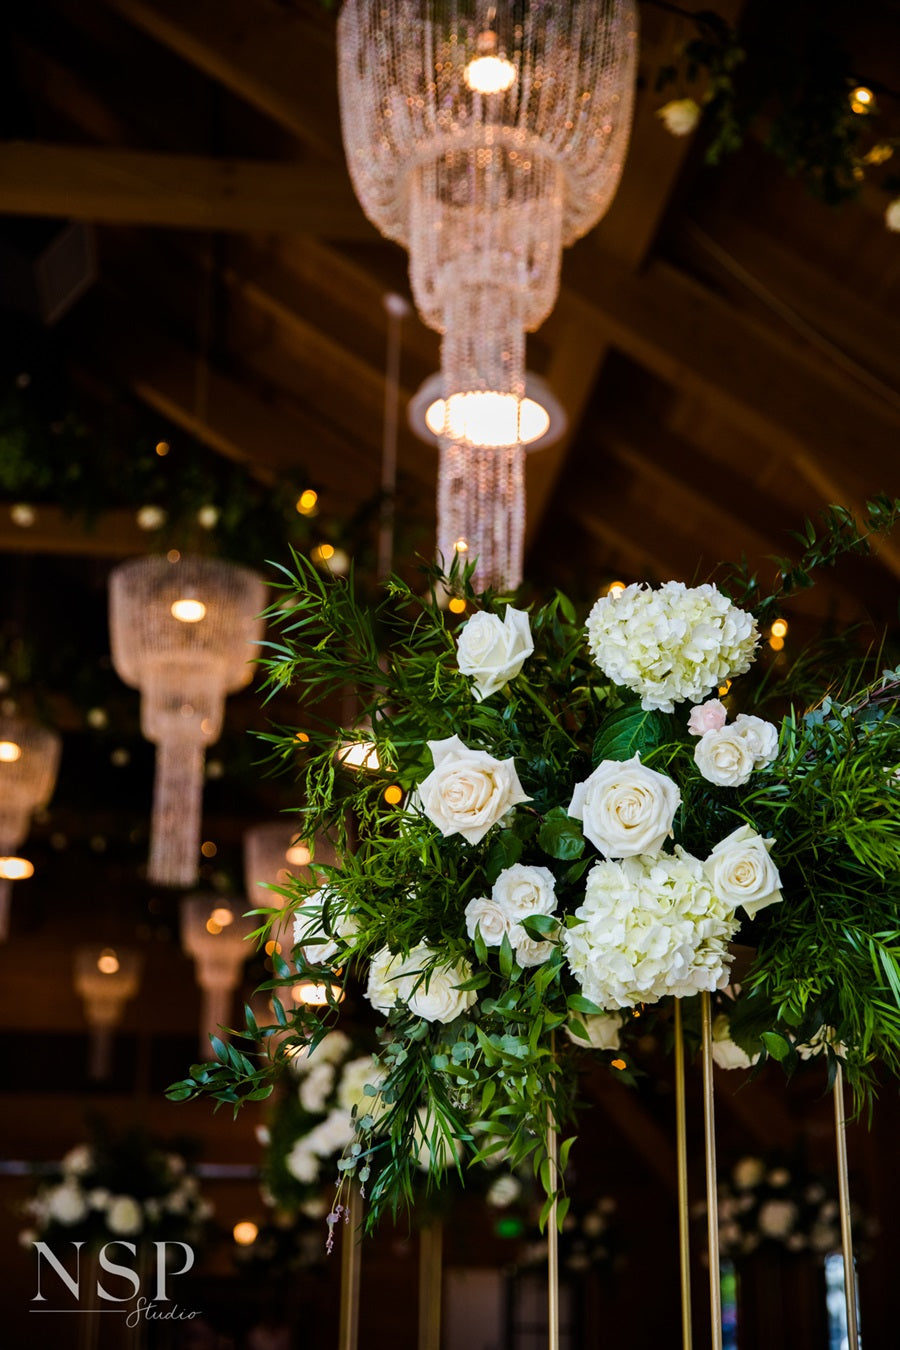 Elevated centerpieces full of greens and white florals. Background shows hanging chandeliers.